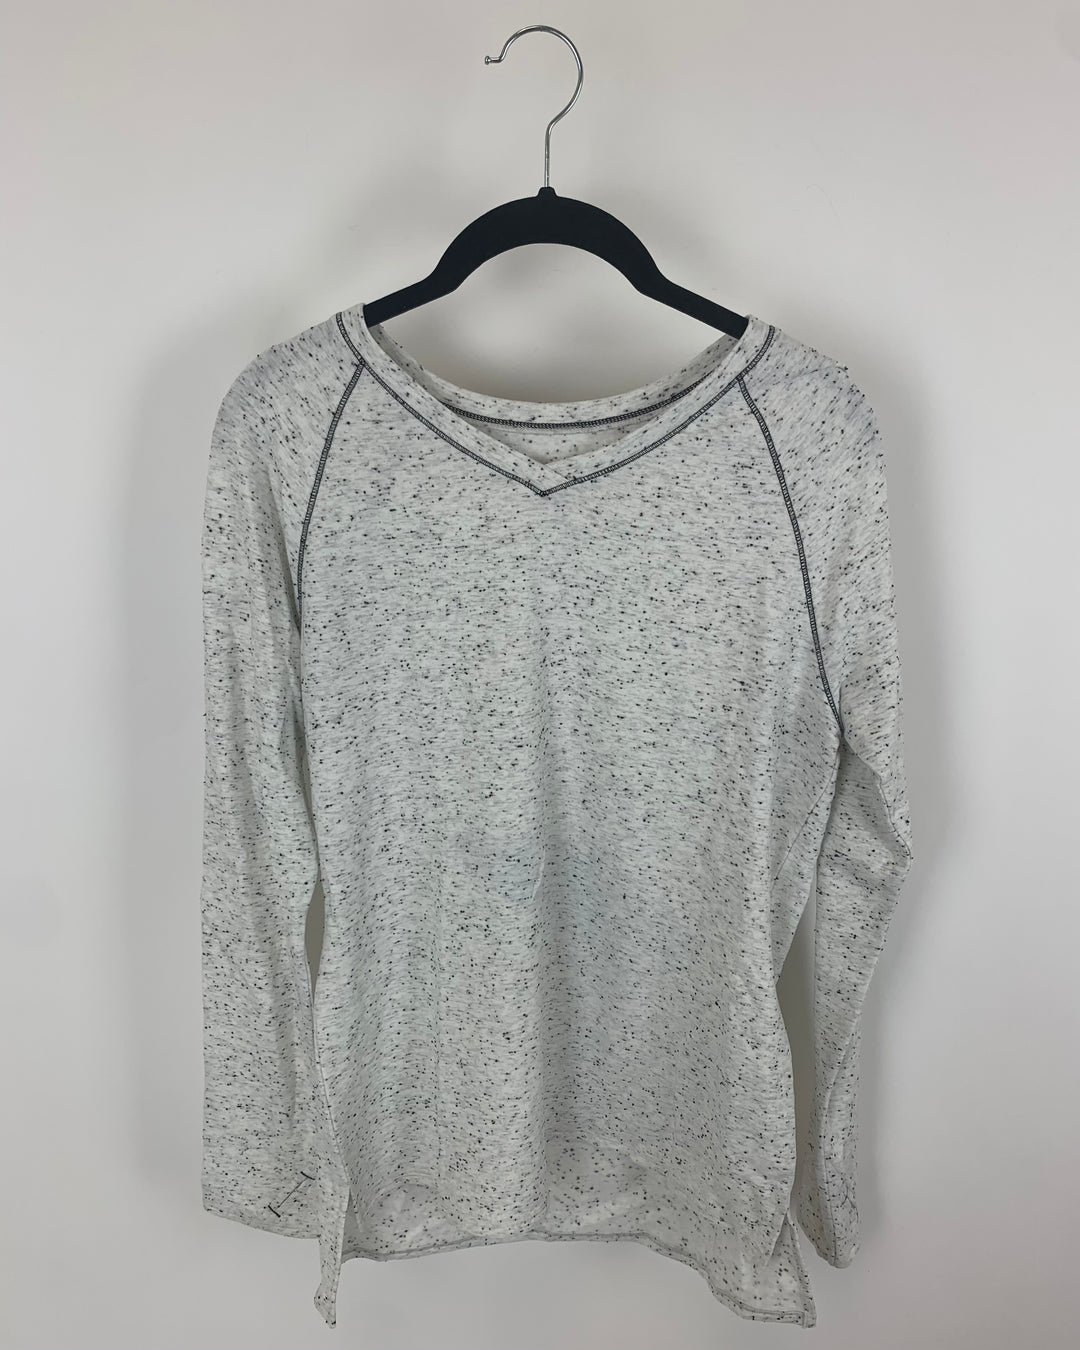 Heathered Gray Top - Size 10/12